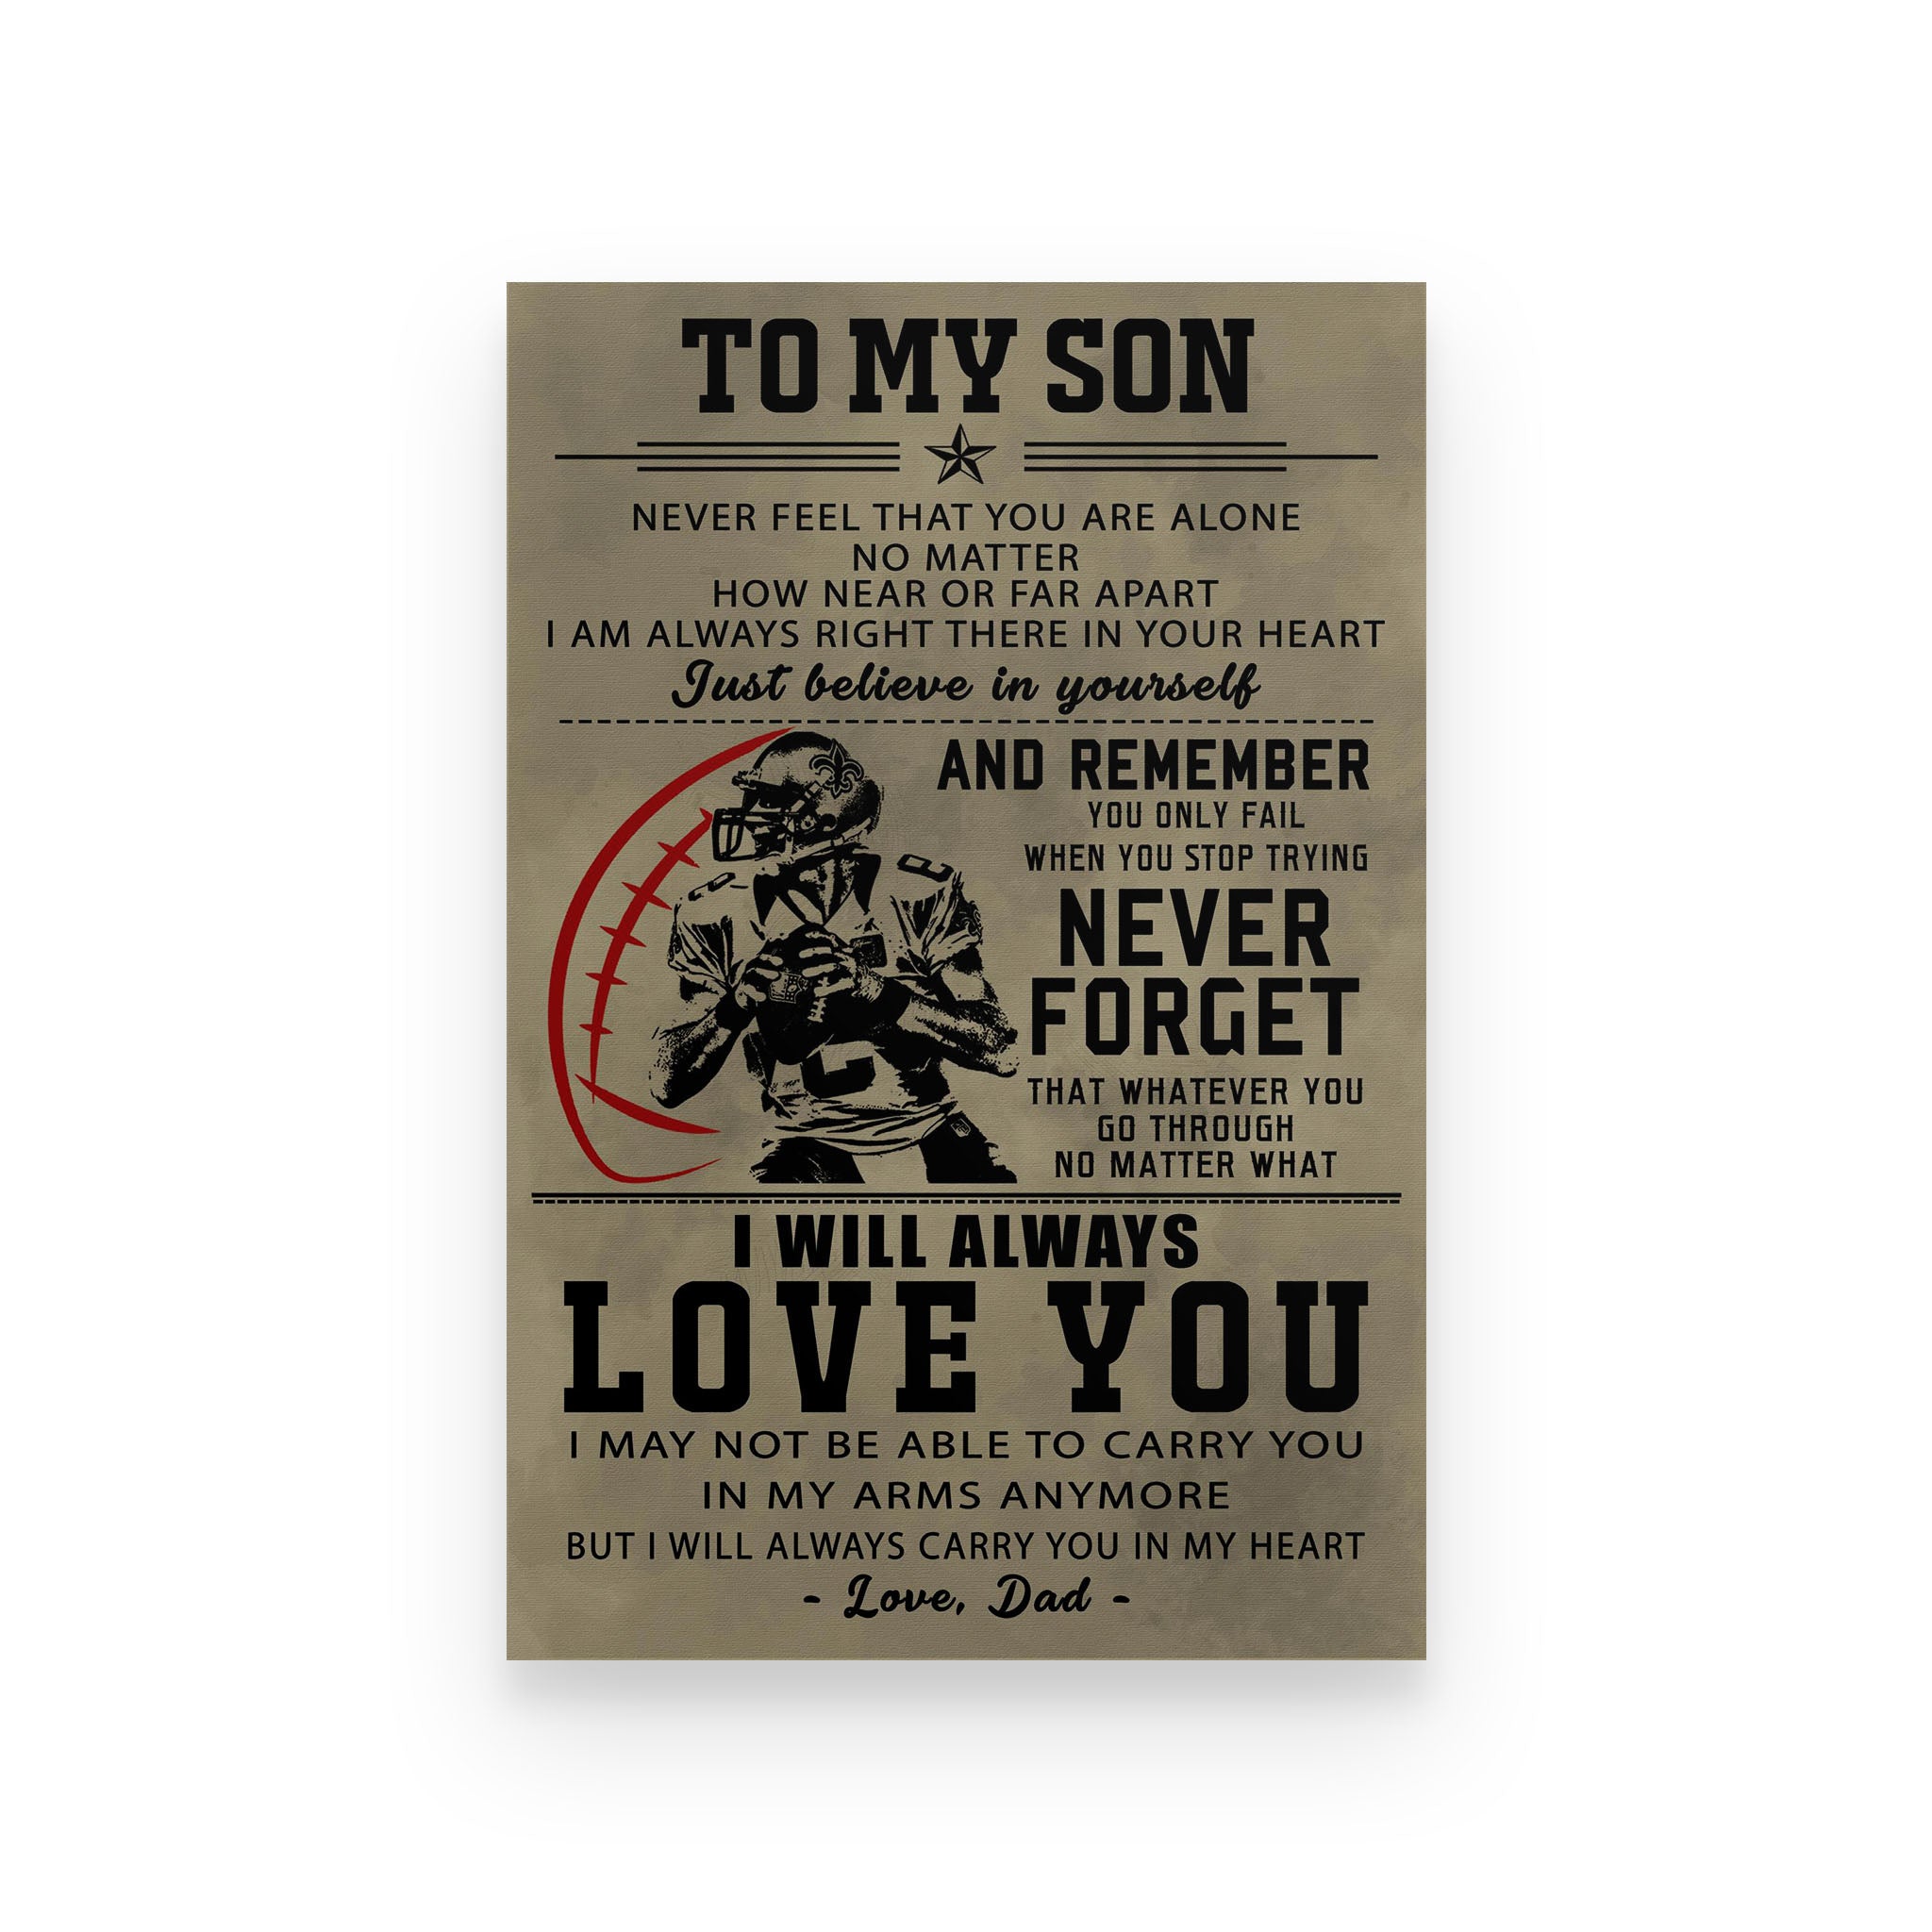 American football poster dad to son never feel that you are alone